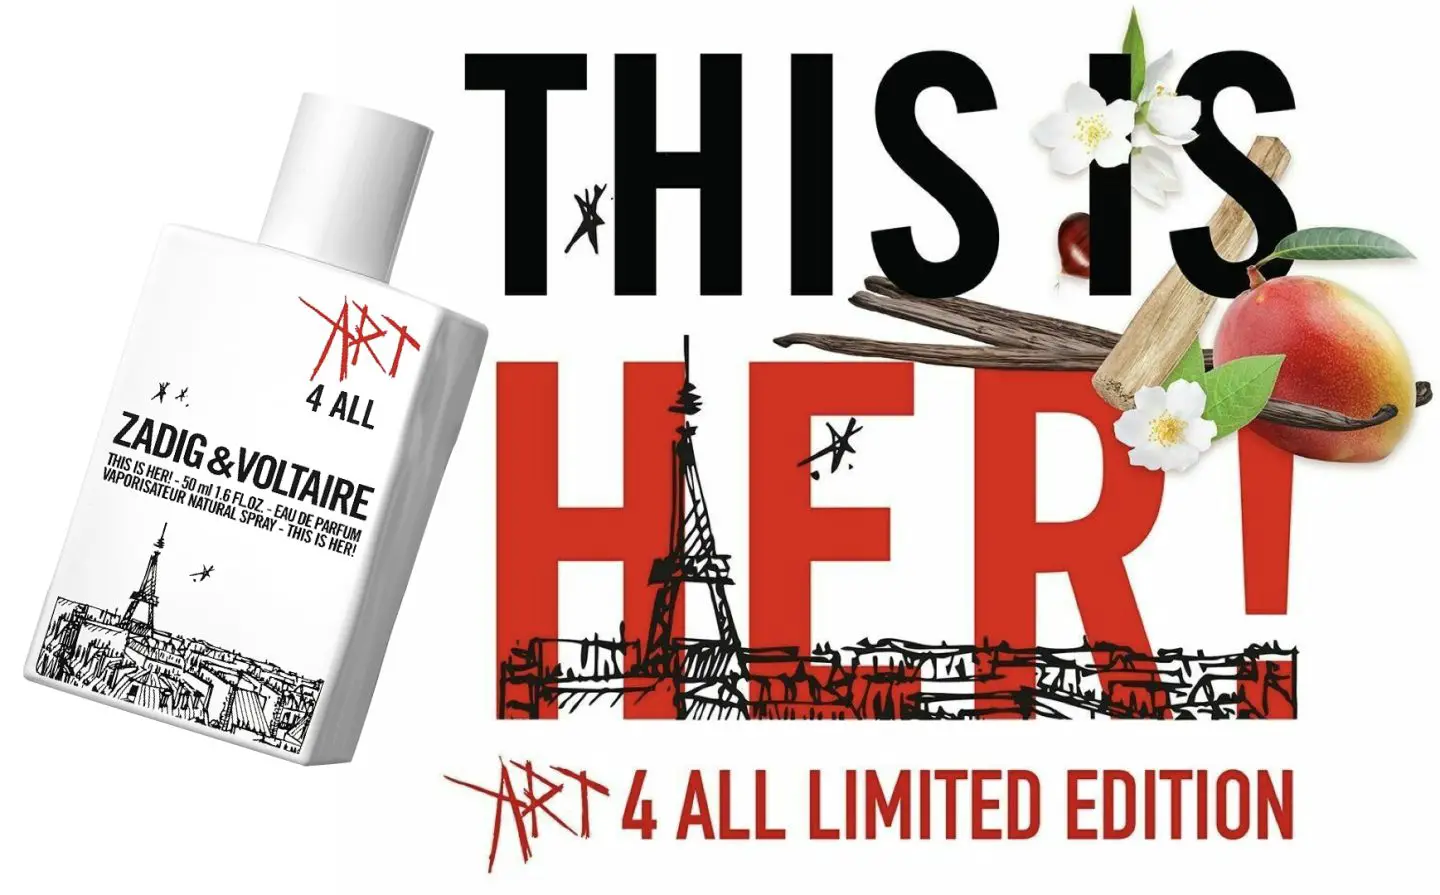 Zadig & Voltaire This Is Her! Art For All